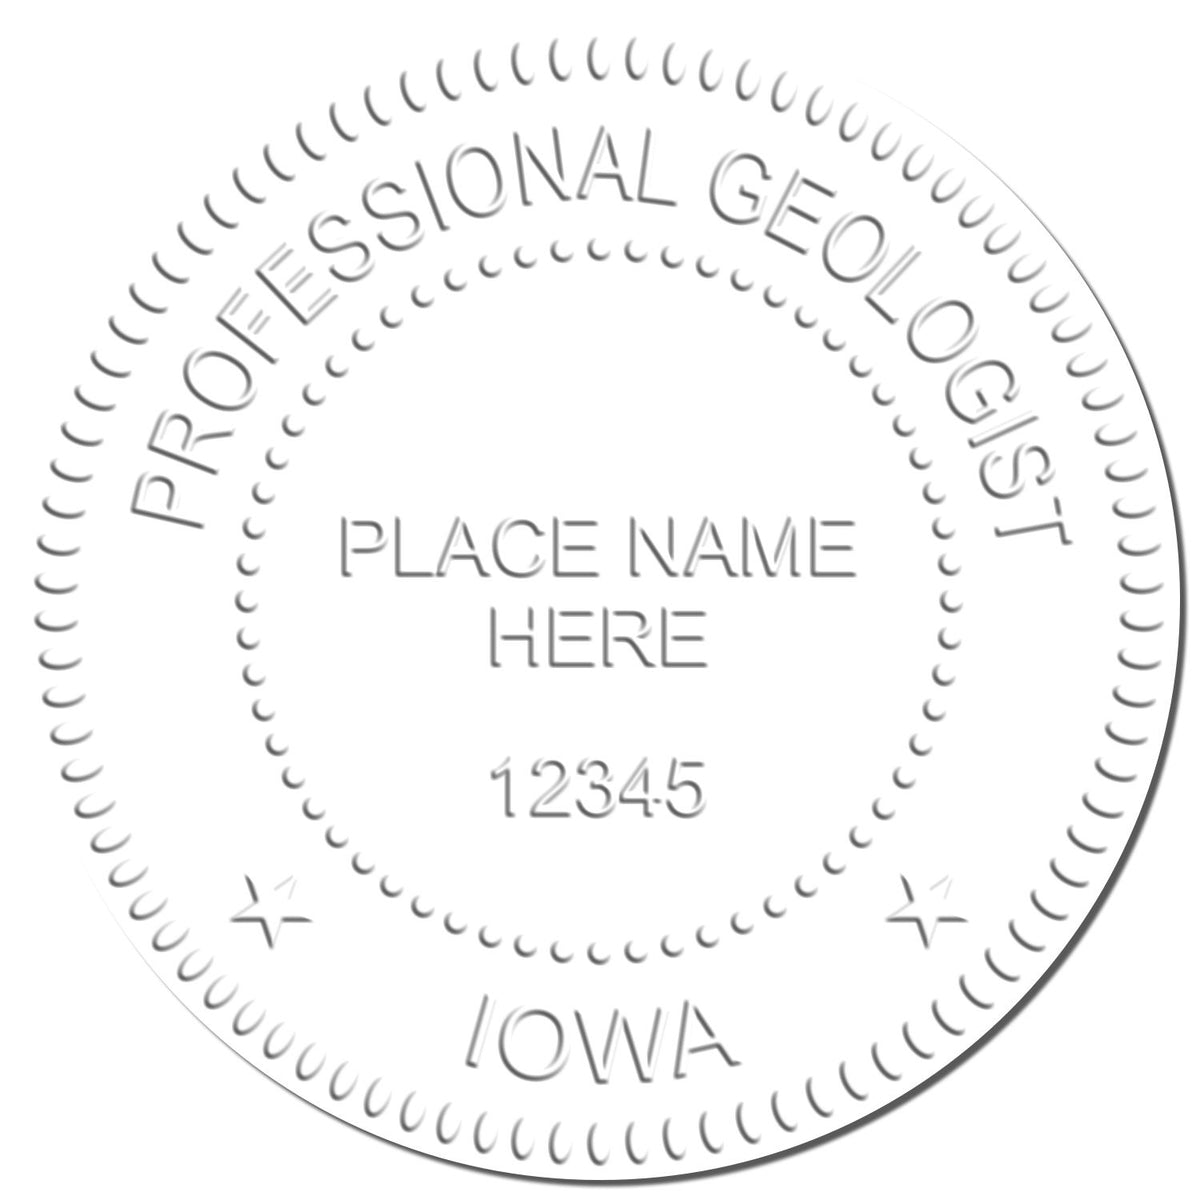 The Iowa Geologist Desk Seal stamp impression comes to life with a crisp, detailed image stamped on paper - showcasing true professional quality.